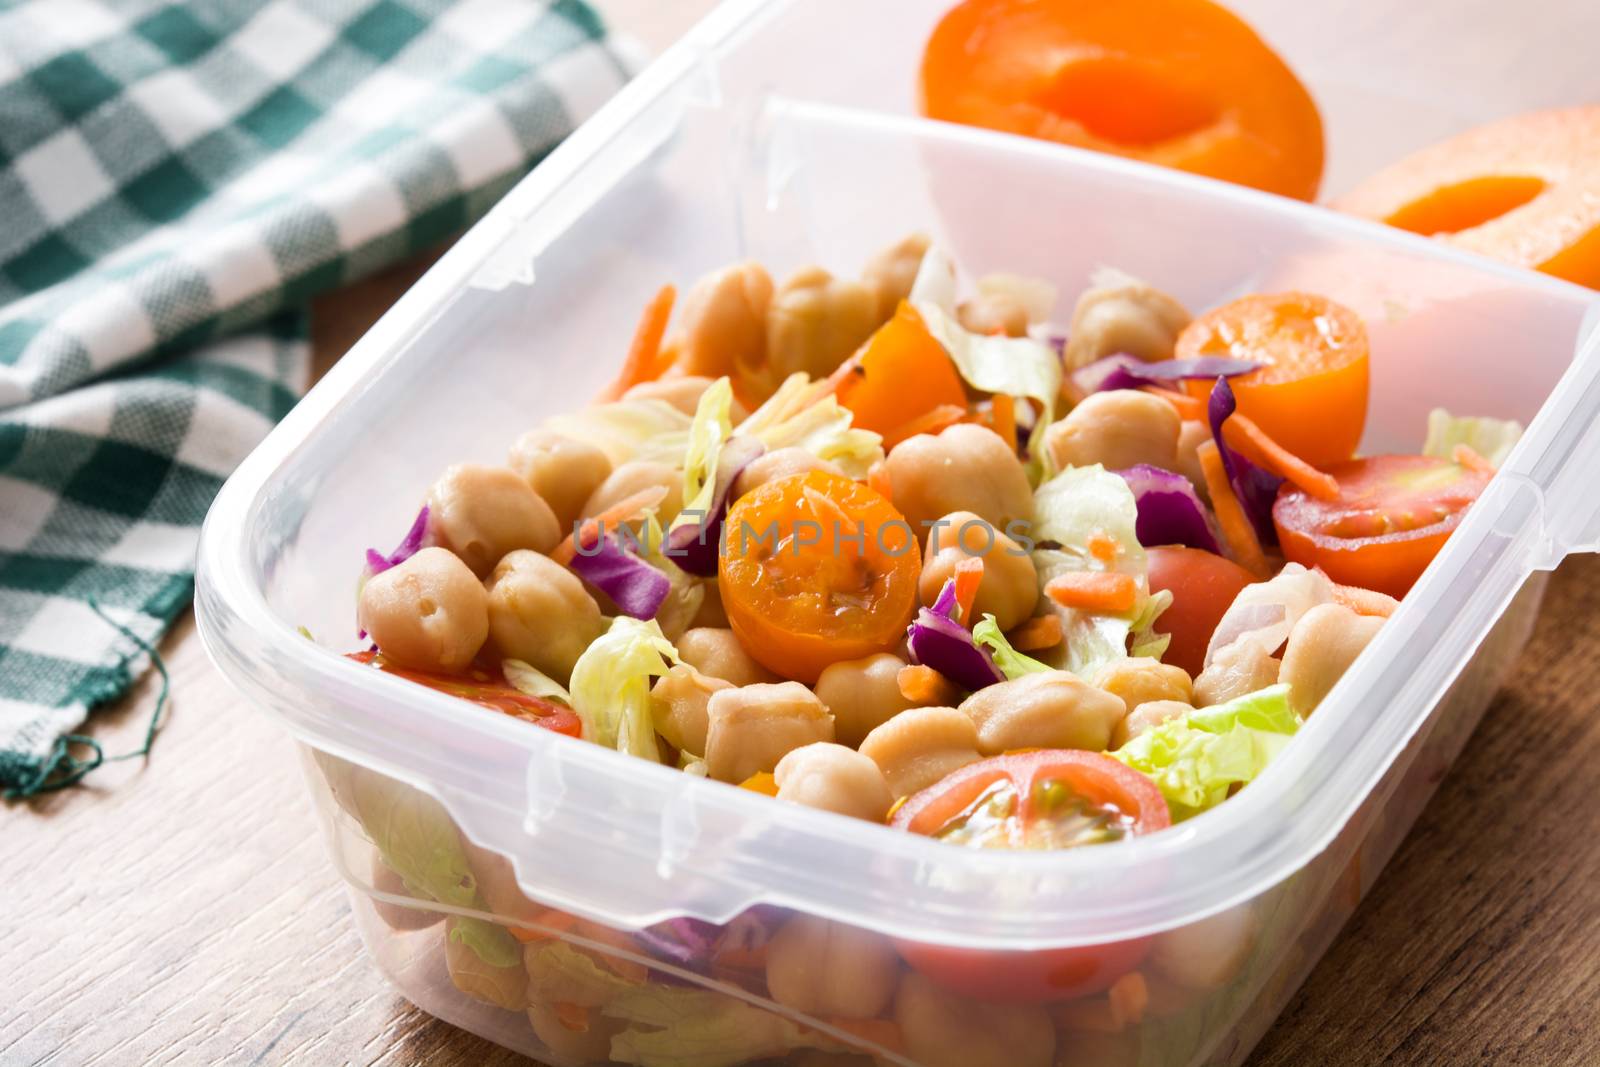 Lunch box with healthy food ready to eat.Chickpea salad on wooden table